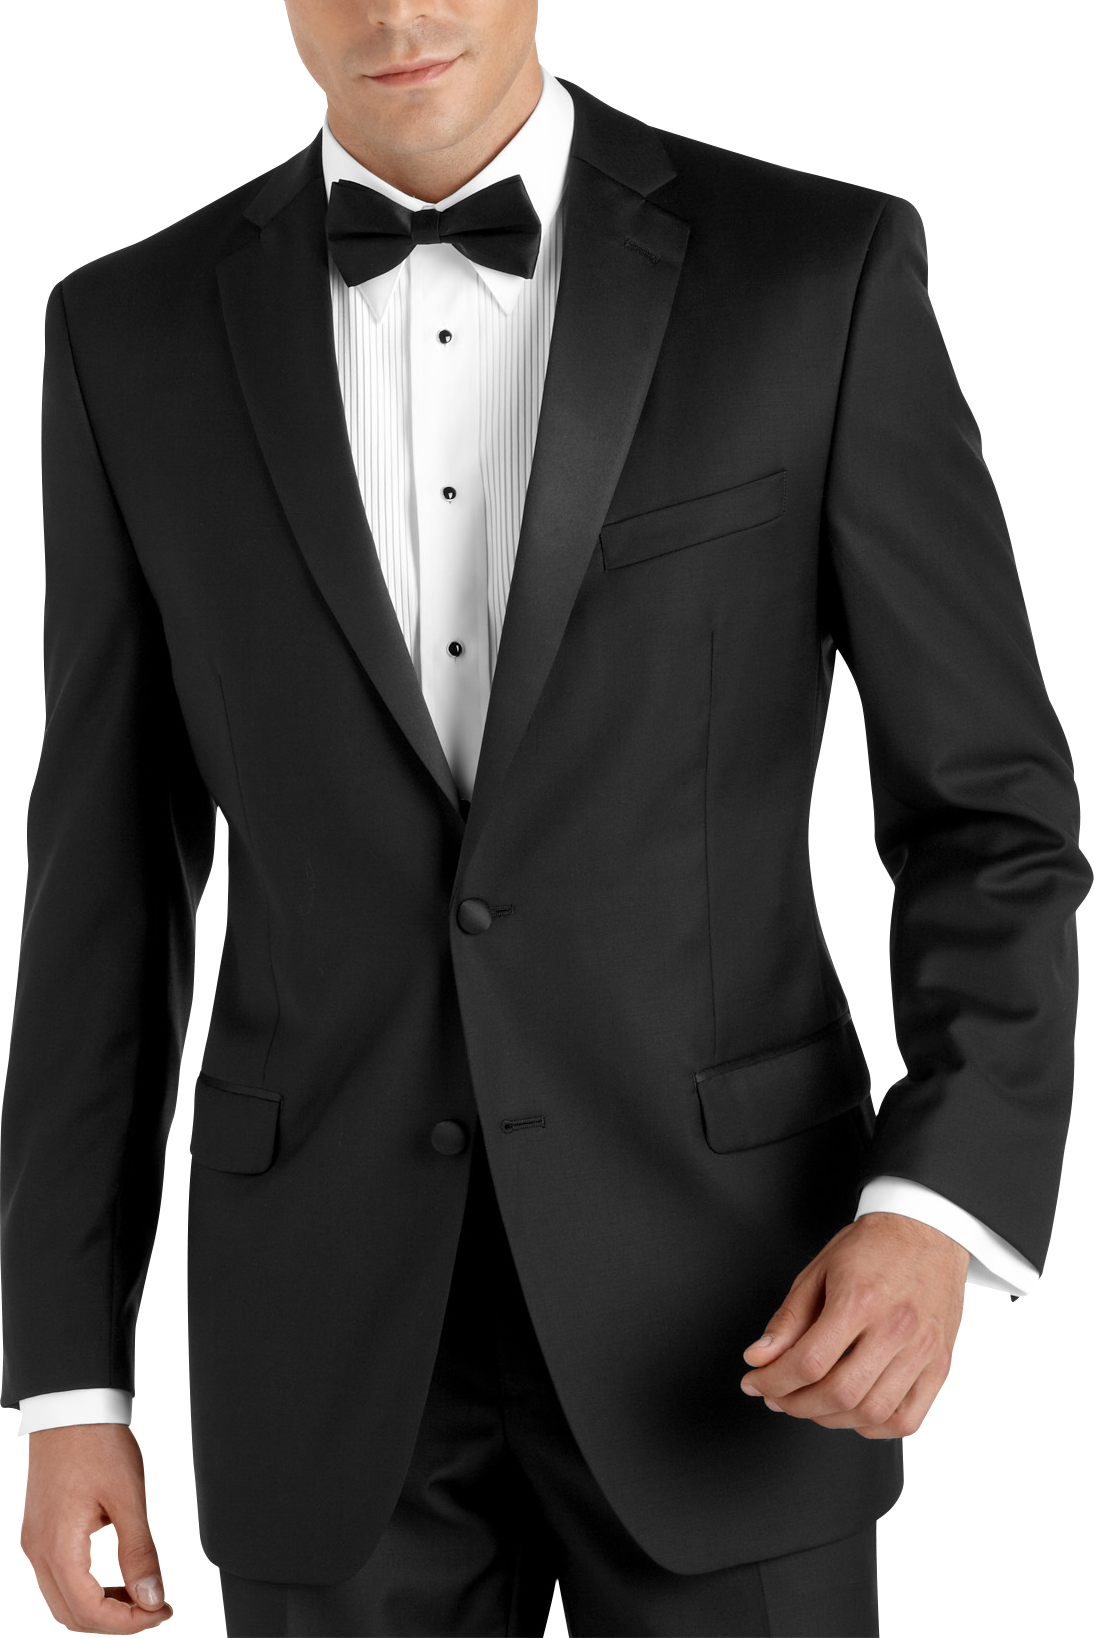 What's the Difference Between a Tuxedo and a Dinner Jacket?